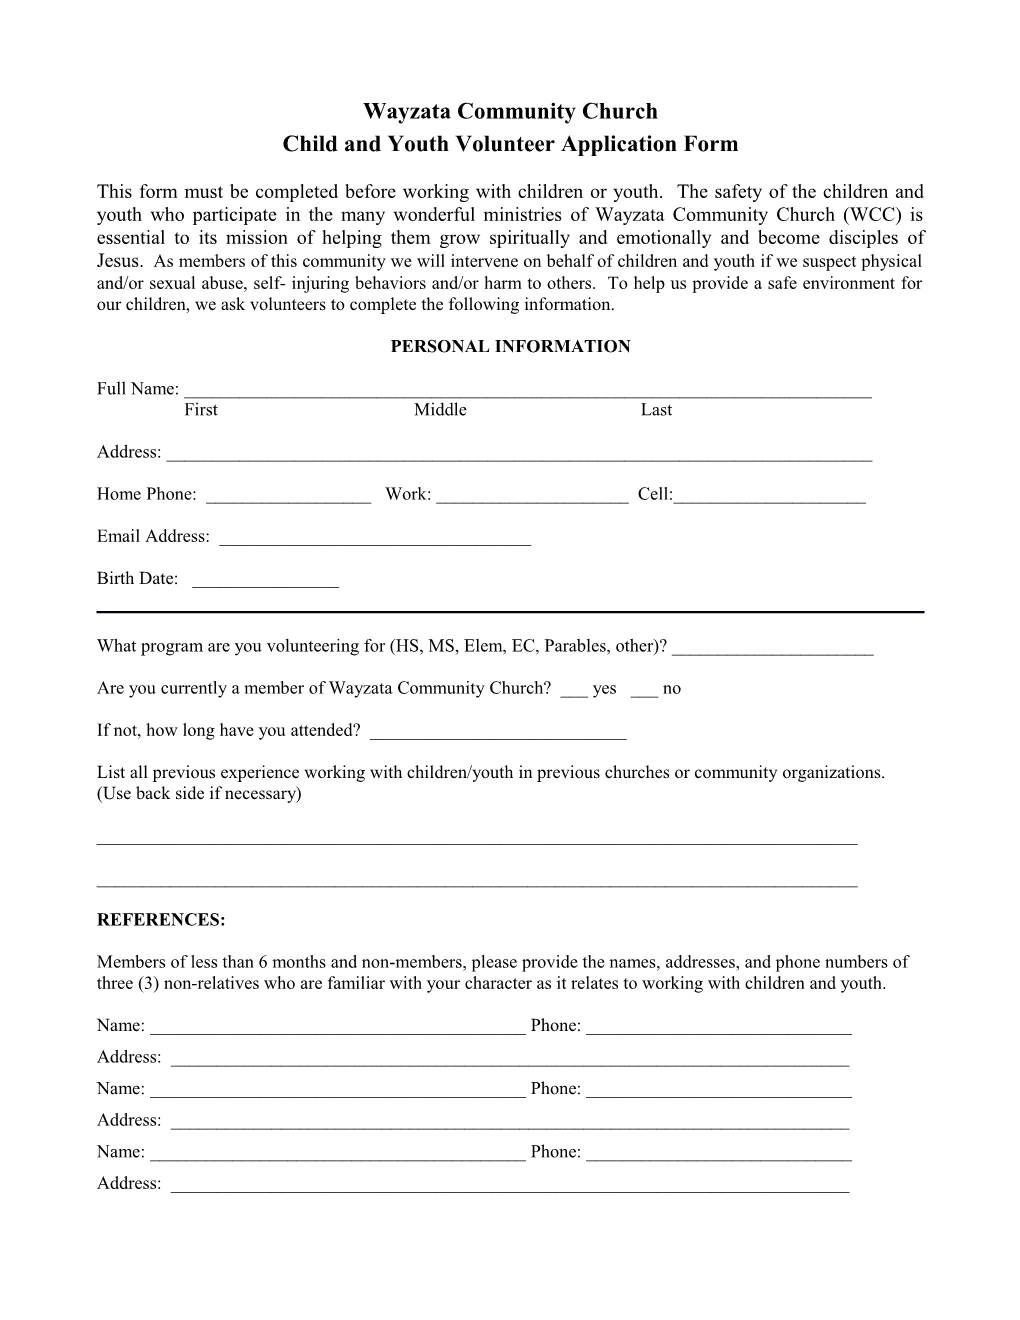 Child and Youth Volunteer Application Form